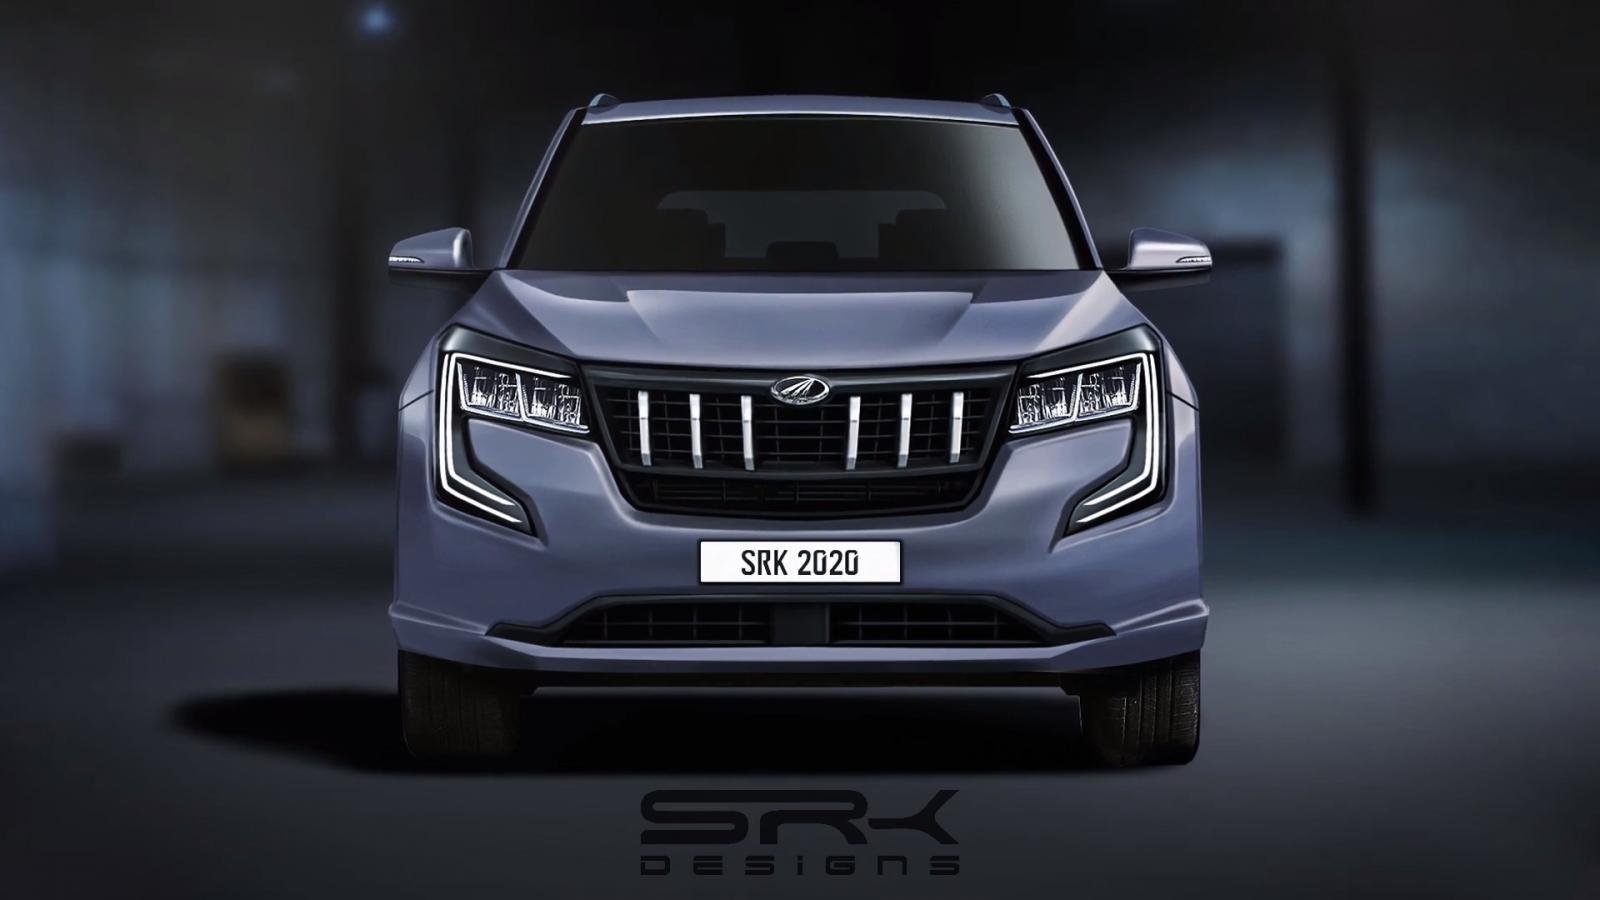 Same Day As Hyundai Alcazar Is Revealed, Mahindra Steals Thunder With XUV700 Announcement